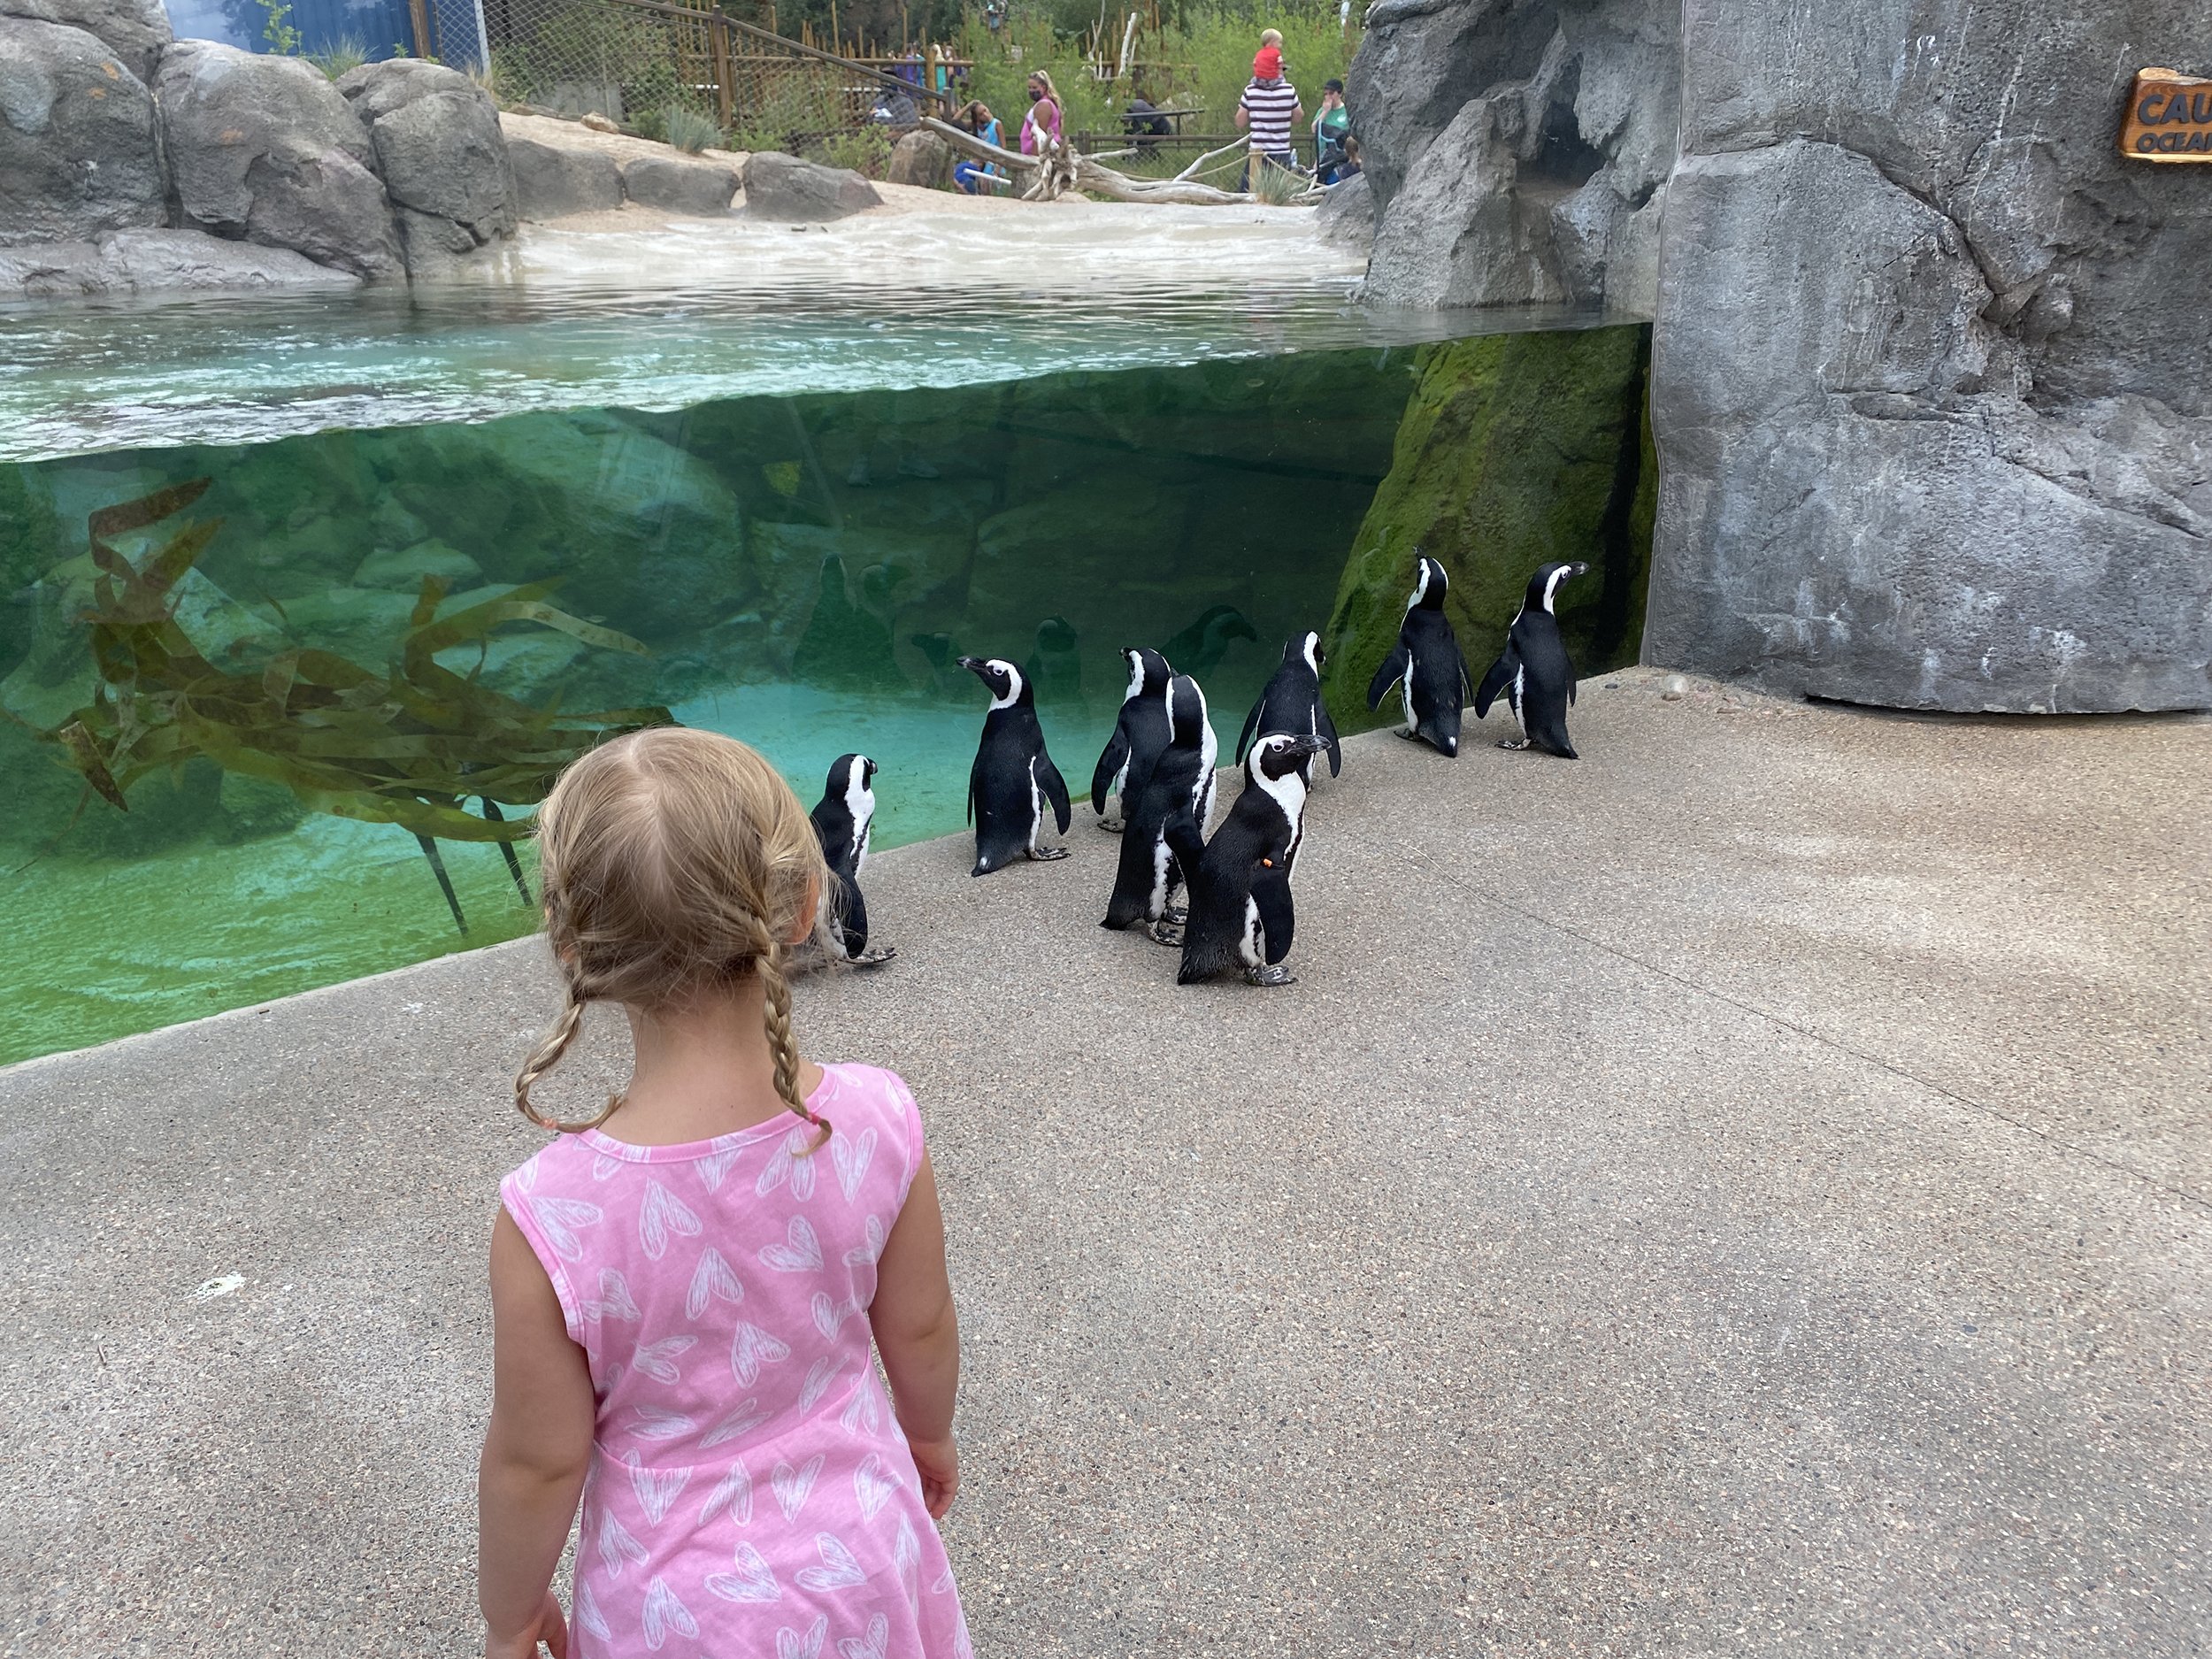 African penguin_walkabout by lower pool with toddler guest_Amanda Holden_7-13-20w.jpg